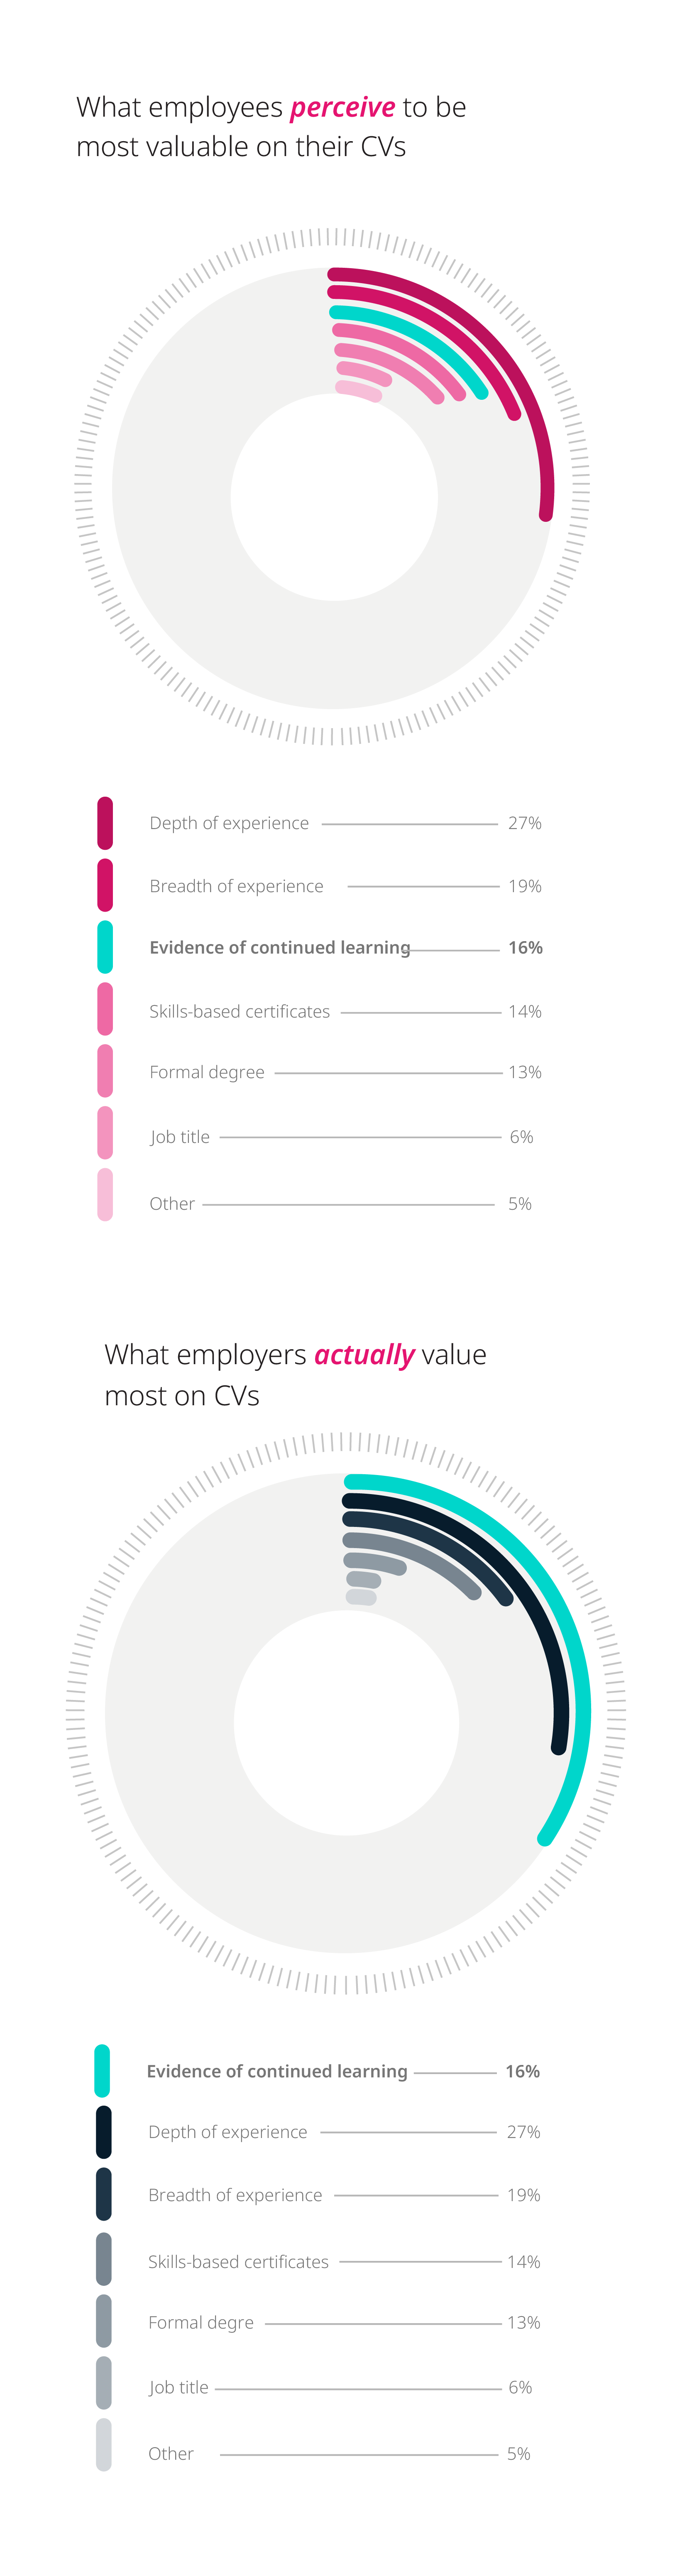 What employees perceive to be most valuable on their CV's vs. what employers actually value most on CV's